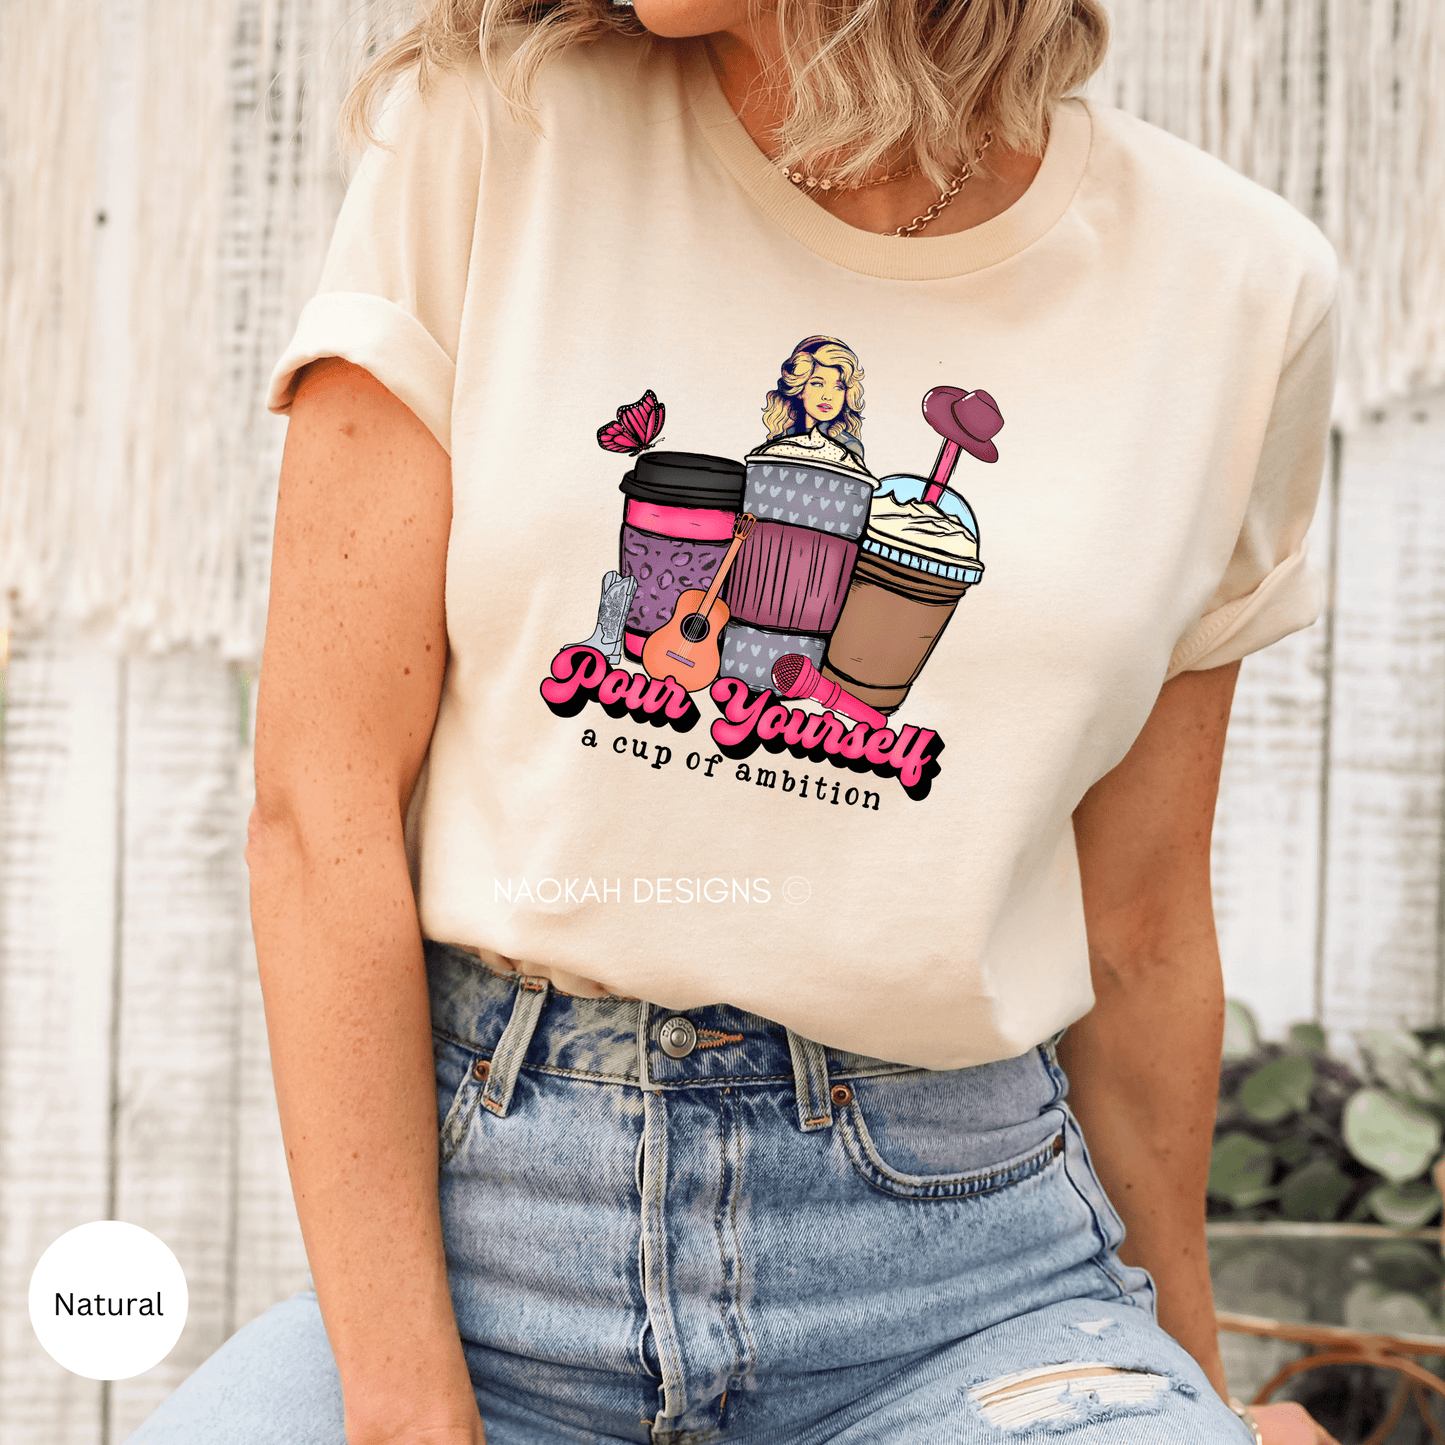 Pour Yourself A Cup Of Ambition Shirt, Dolly Parton Tee, Cowgirl Graphic Tee, Western T-Shirt, Western Graphic Tee, Jolene T-shirt